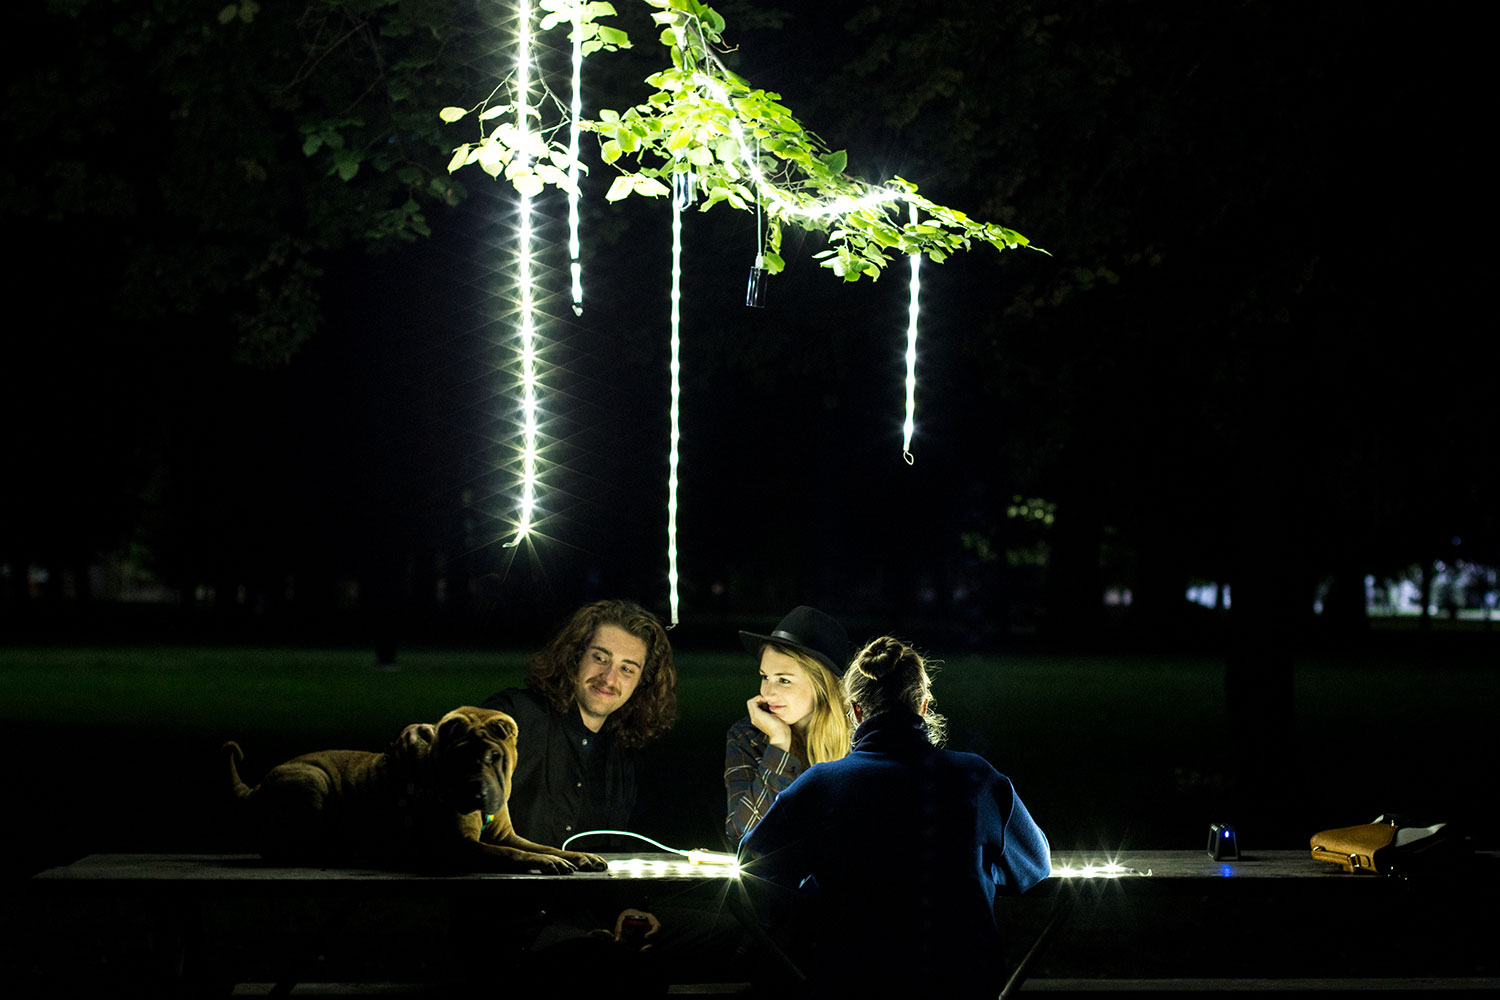 the luminoodle is a portable led light strip picnic hanging luminoodles